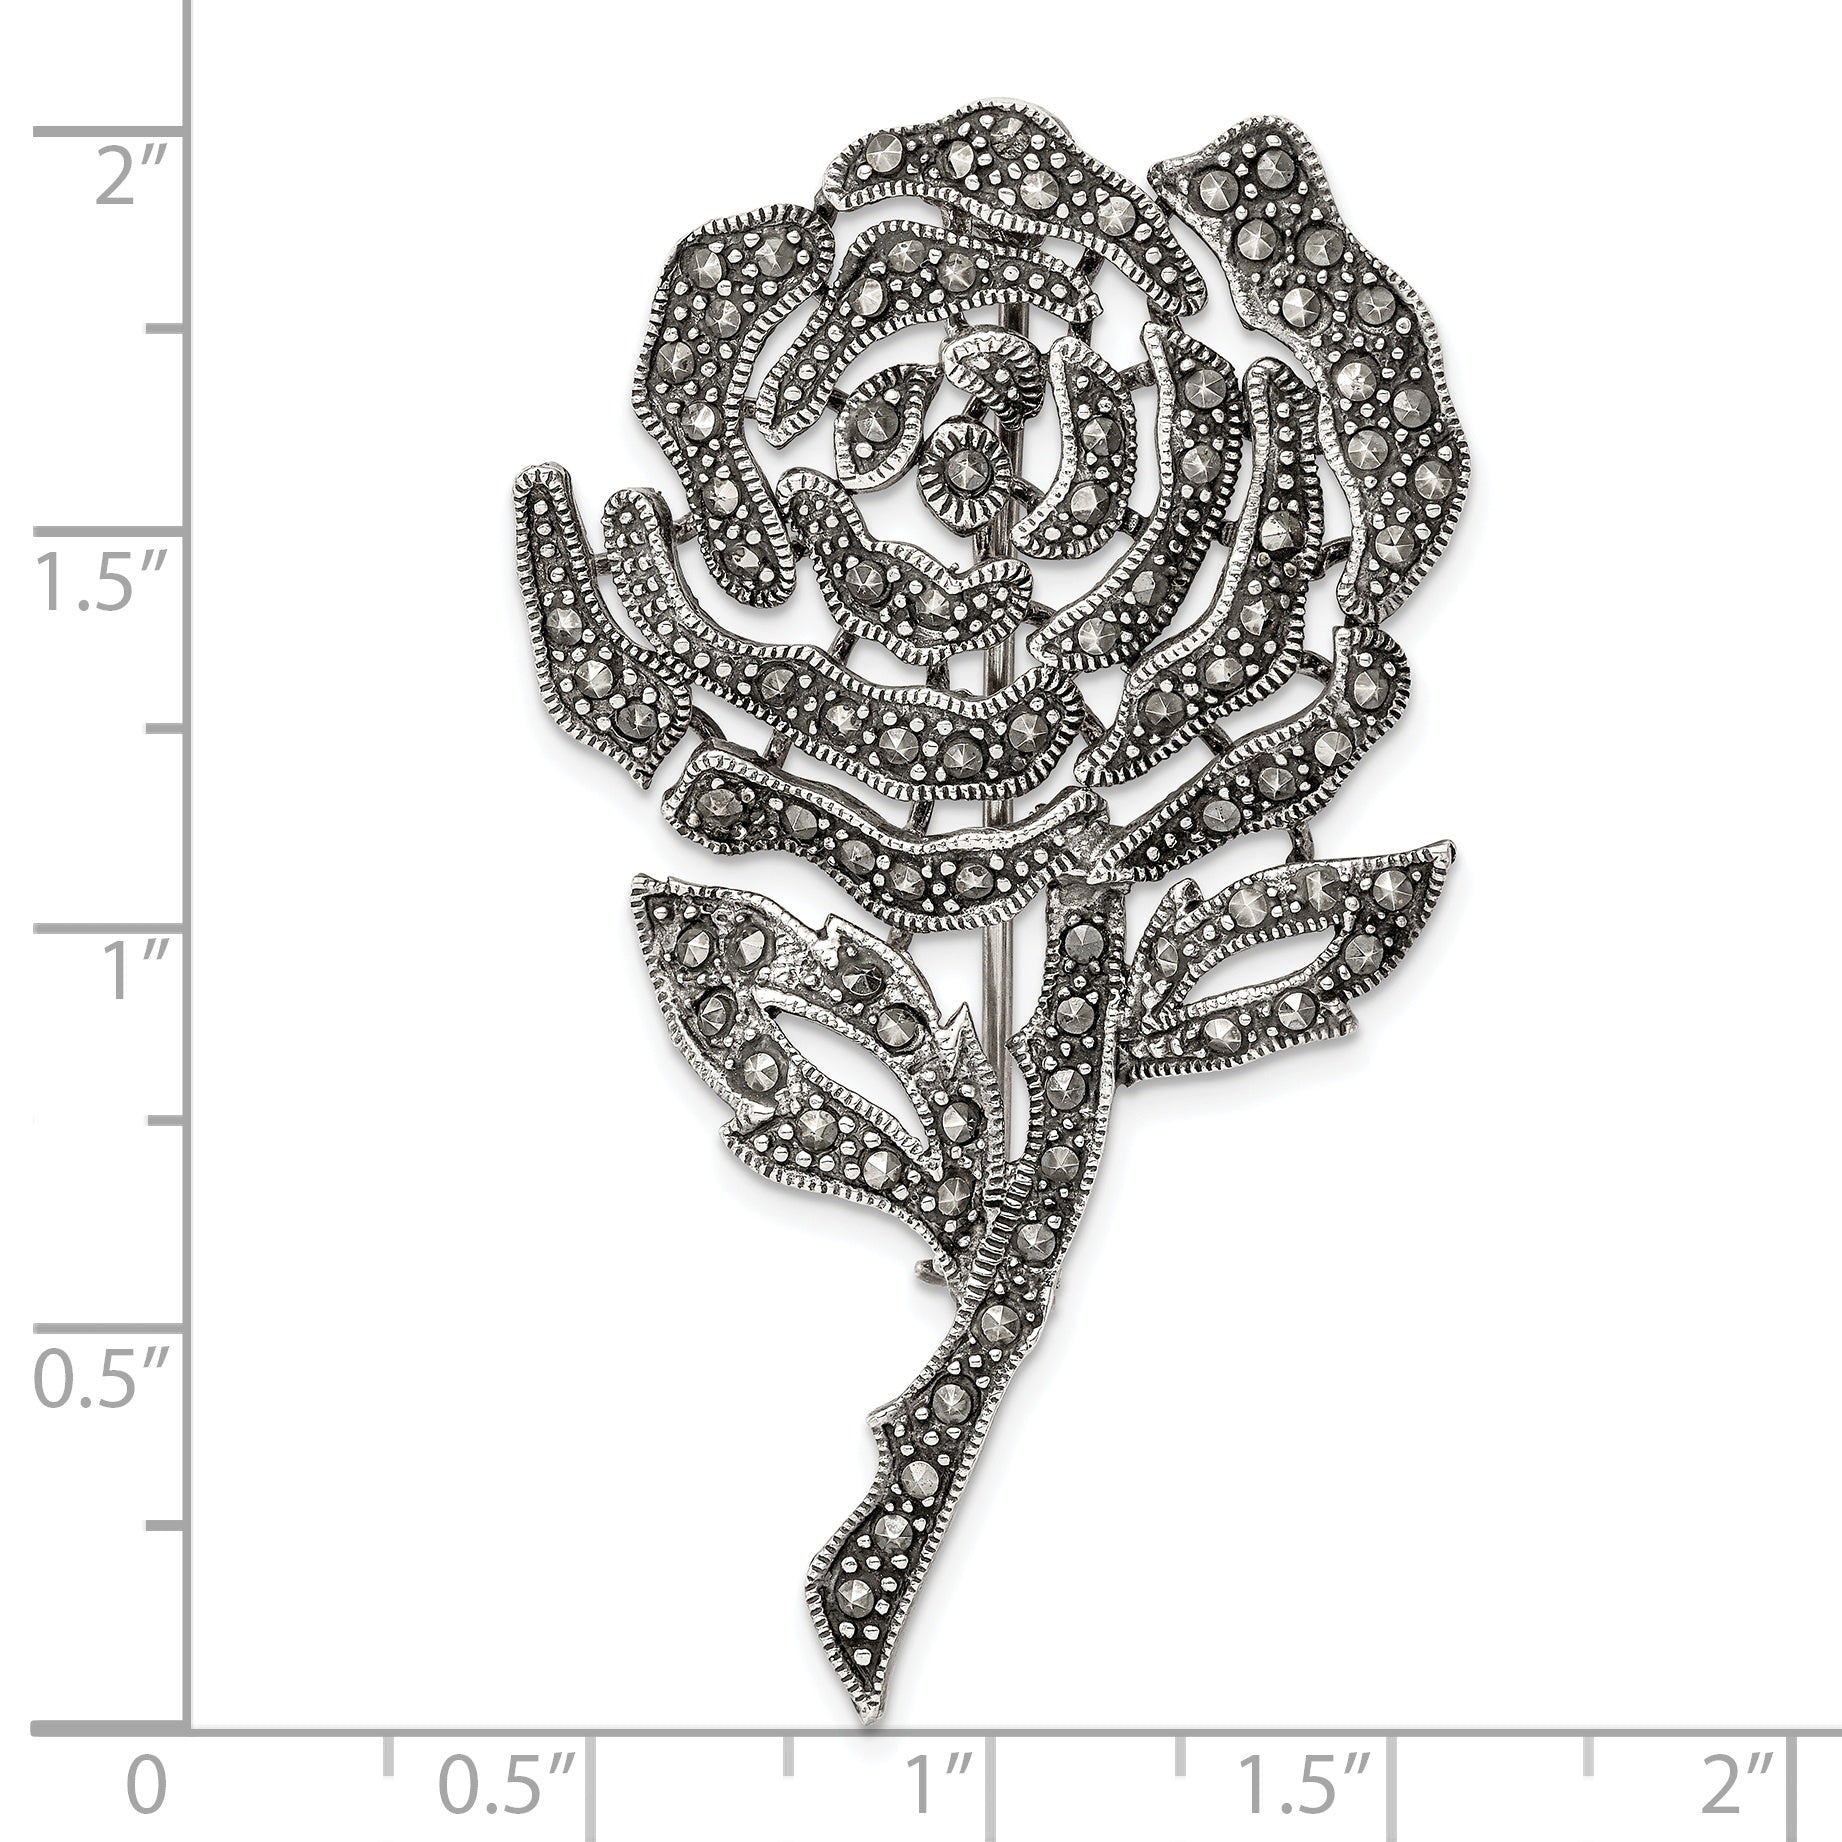 Sterling Silver Antiqued Marcasite Flower Pin Brooch